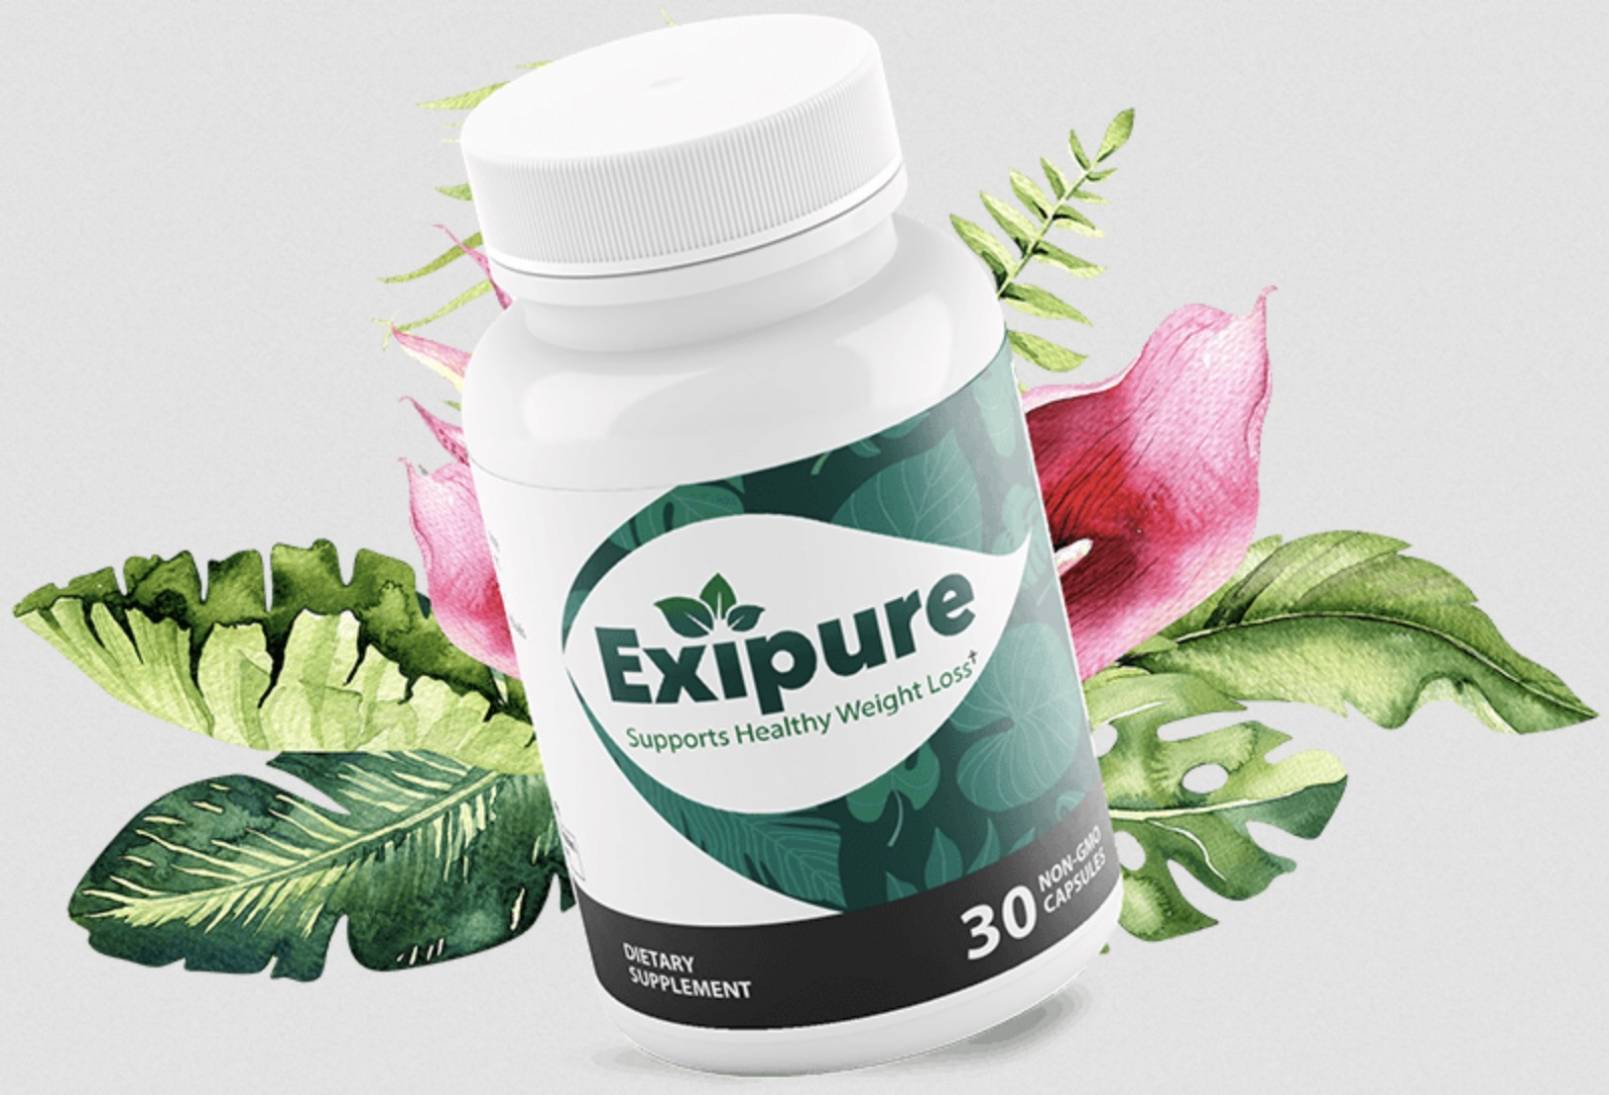 Expired Tablets For Weight Loss